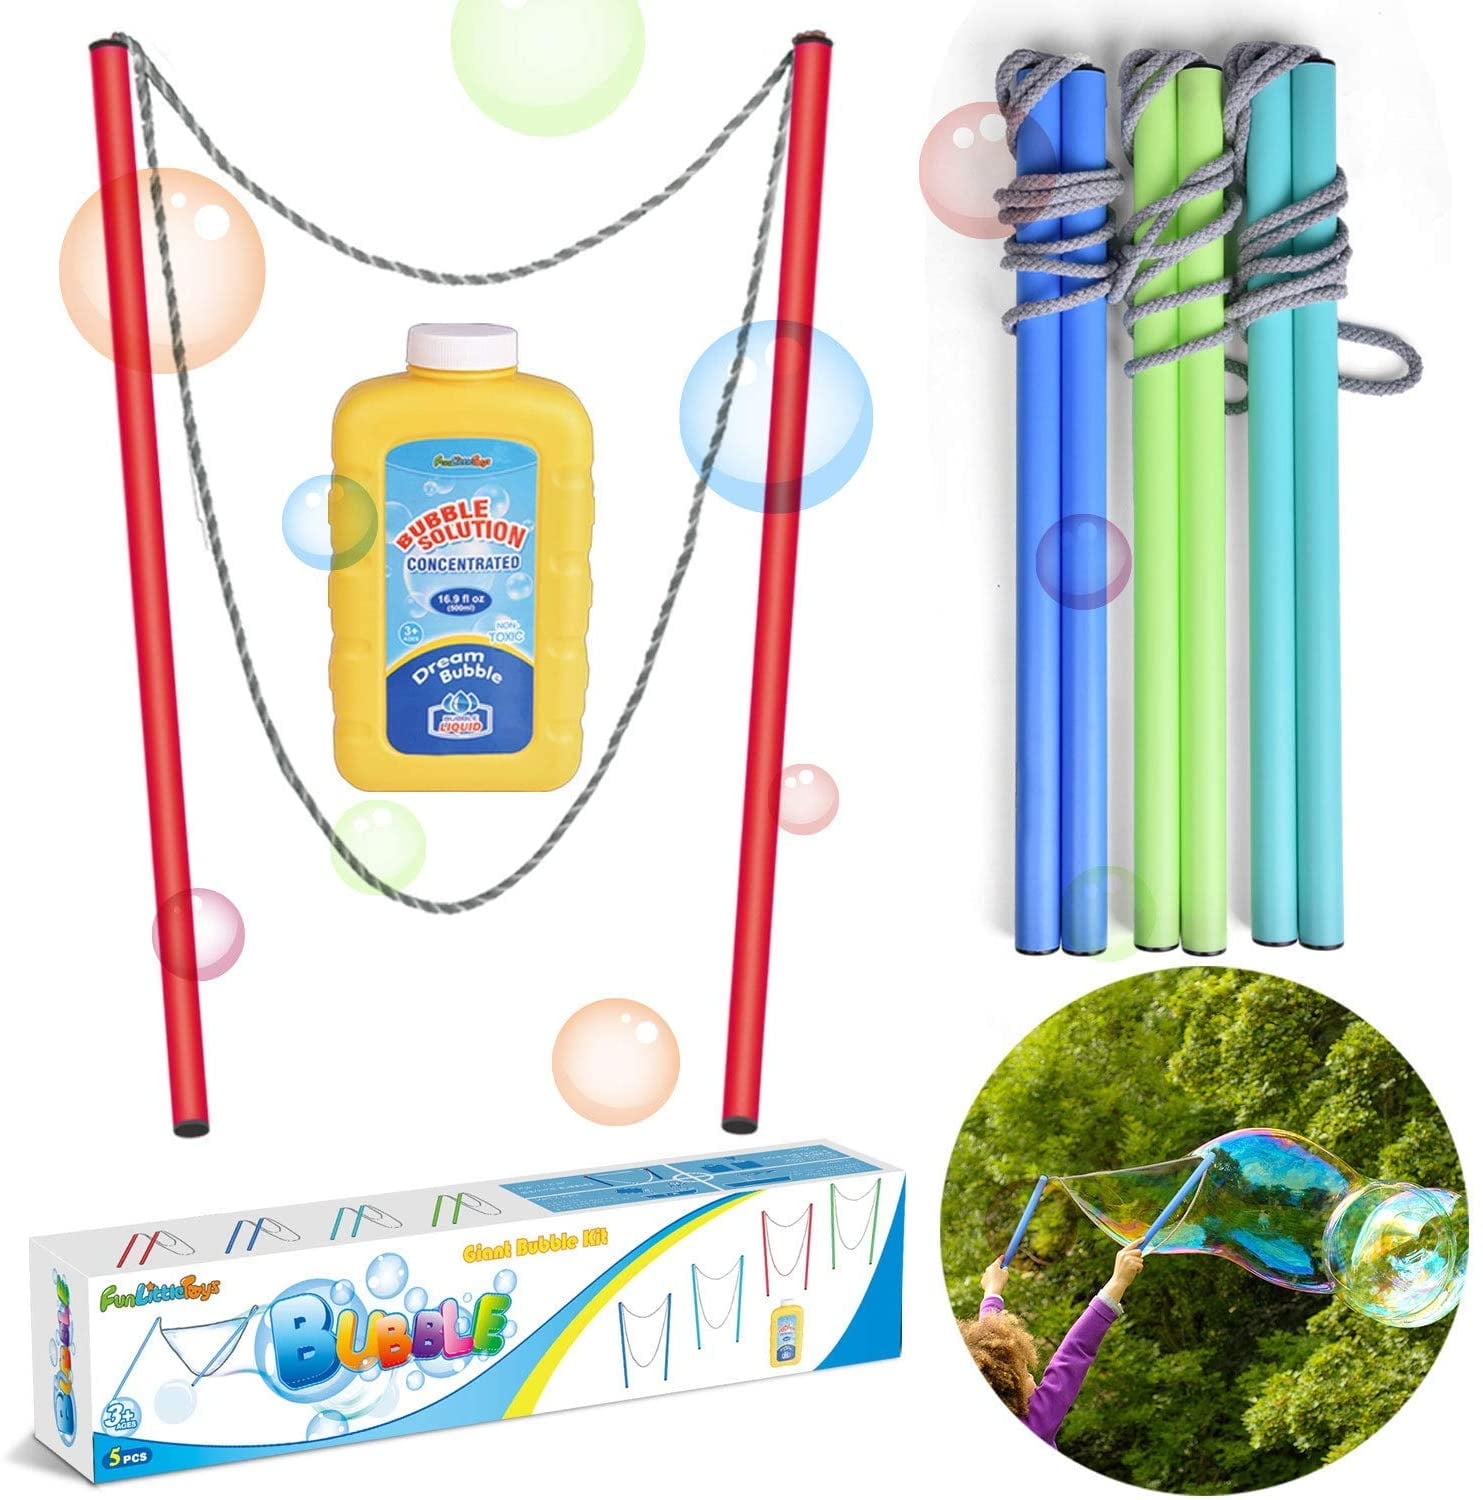 Giant Bubble Wands for Kids Adults Making Big Bubbles Best Outdoor Summer Toy 